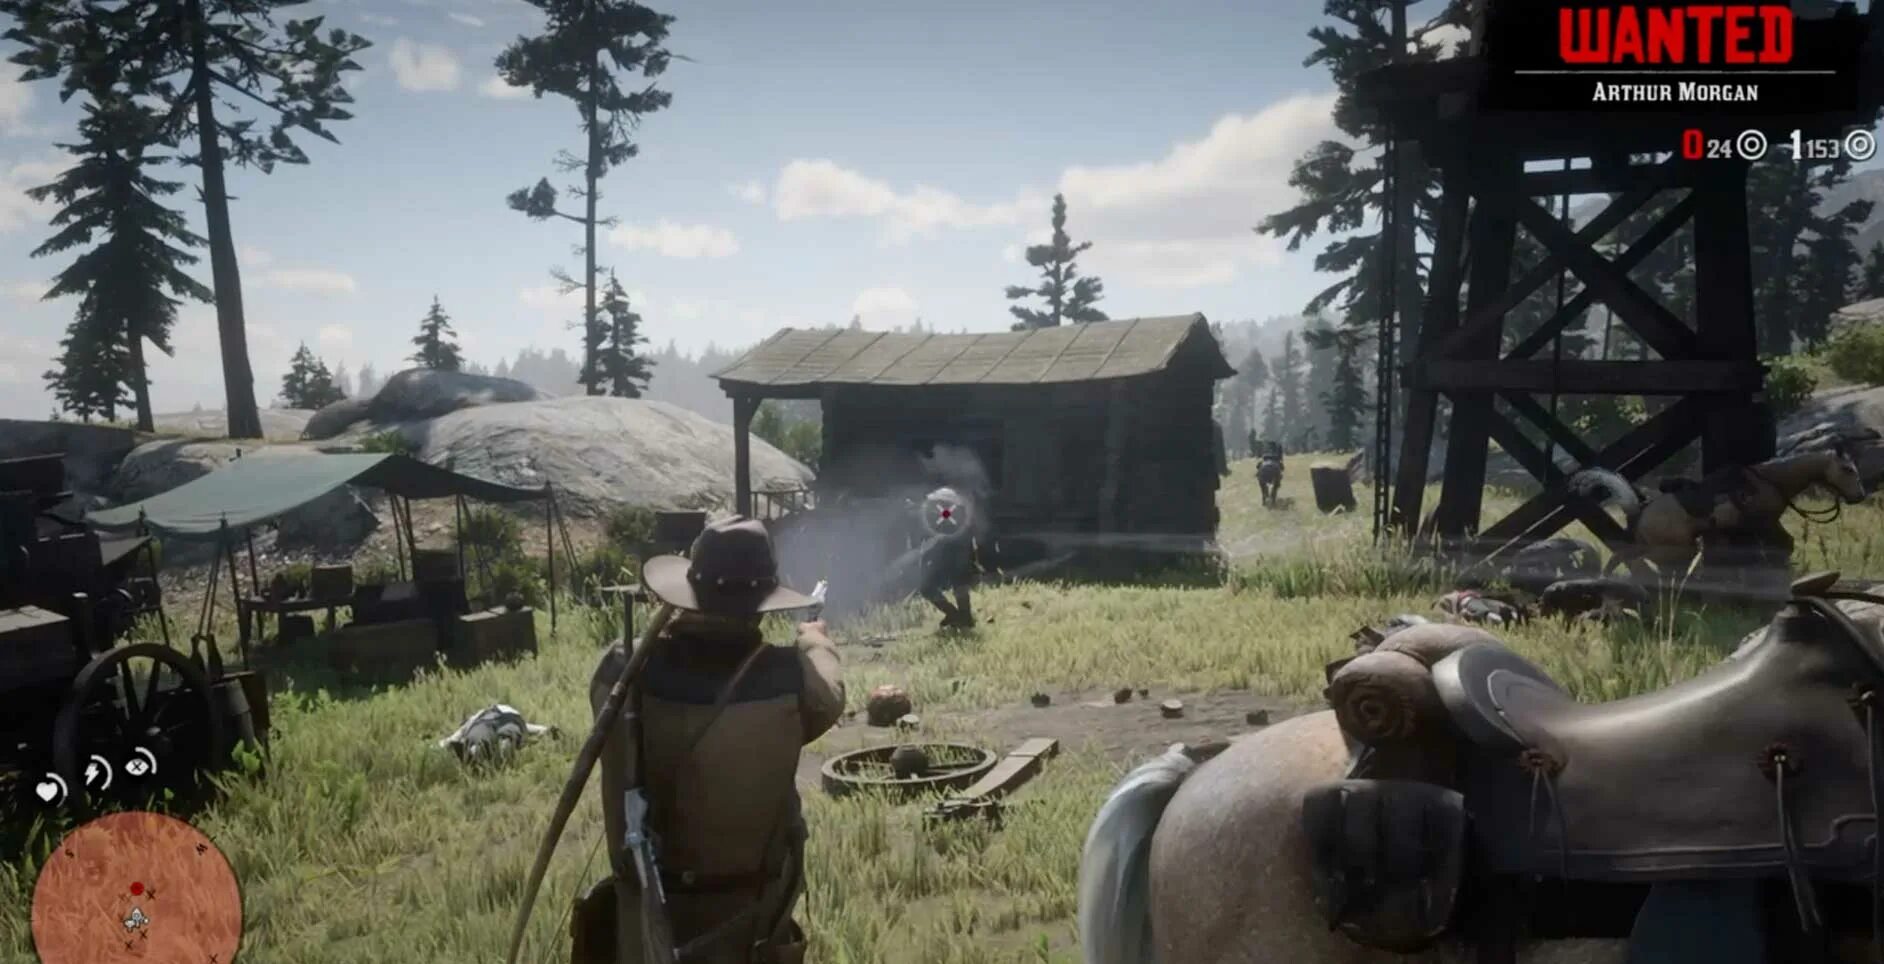 Red Dead Redemption 2 ps4. Red Dead Redemption 2 Gameplay. Ред дед редемпшн 2 геймплей. Red Dead Redemption 2 геймплей.